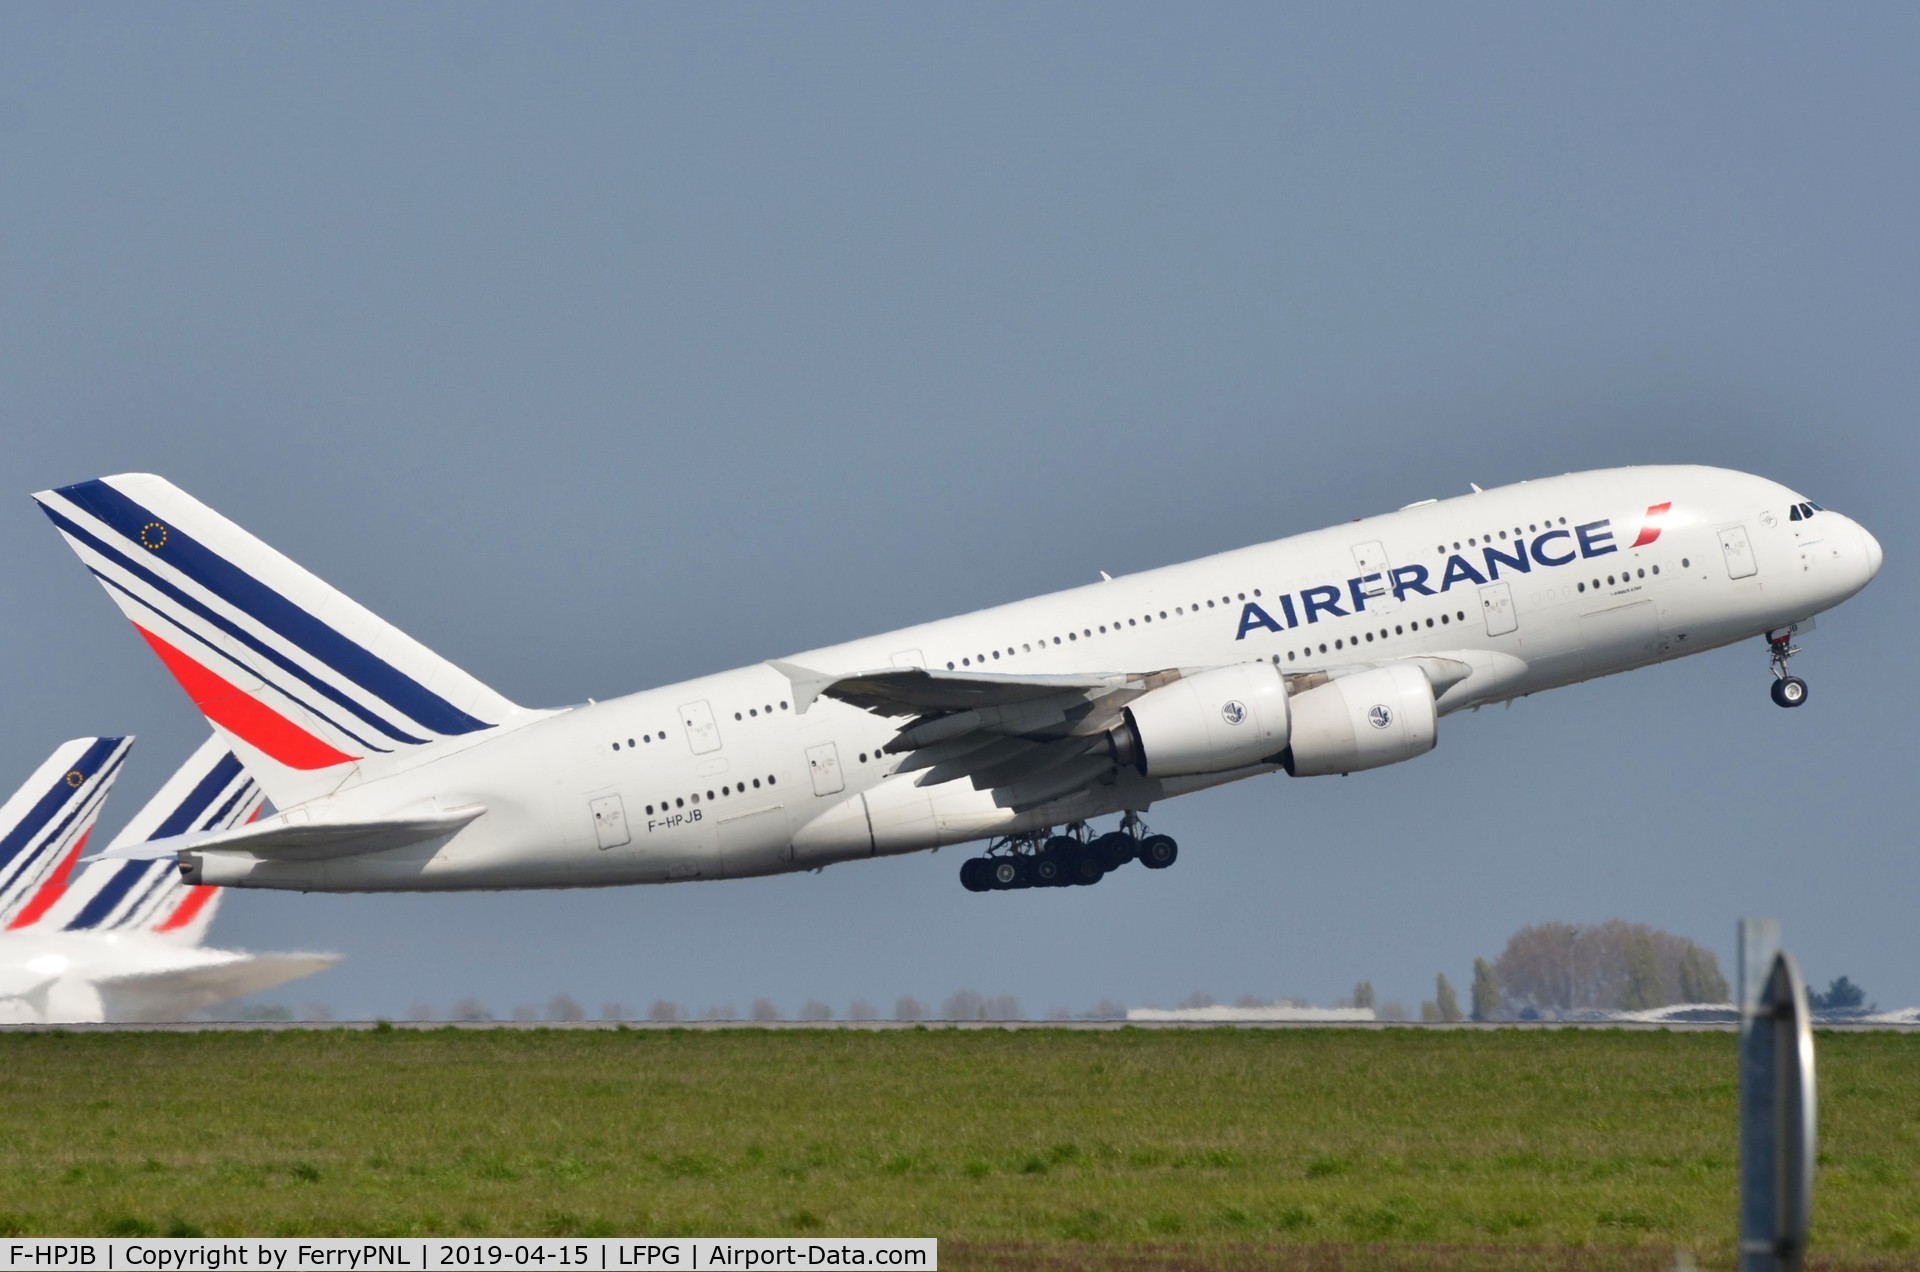 F-HPJB, 2009 Airbus A380-861 C/N 040, Departure of Air France A388